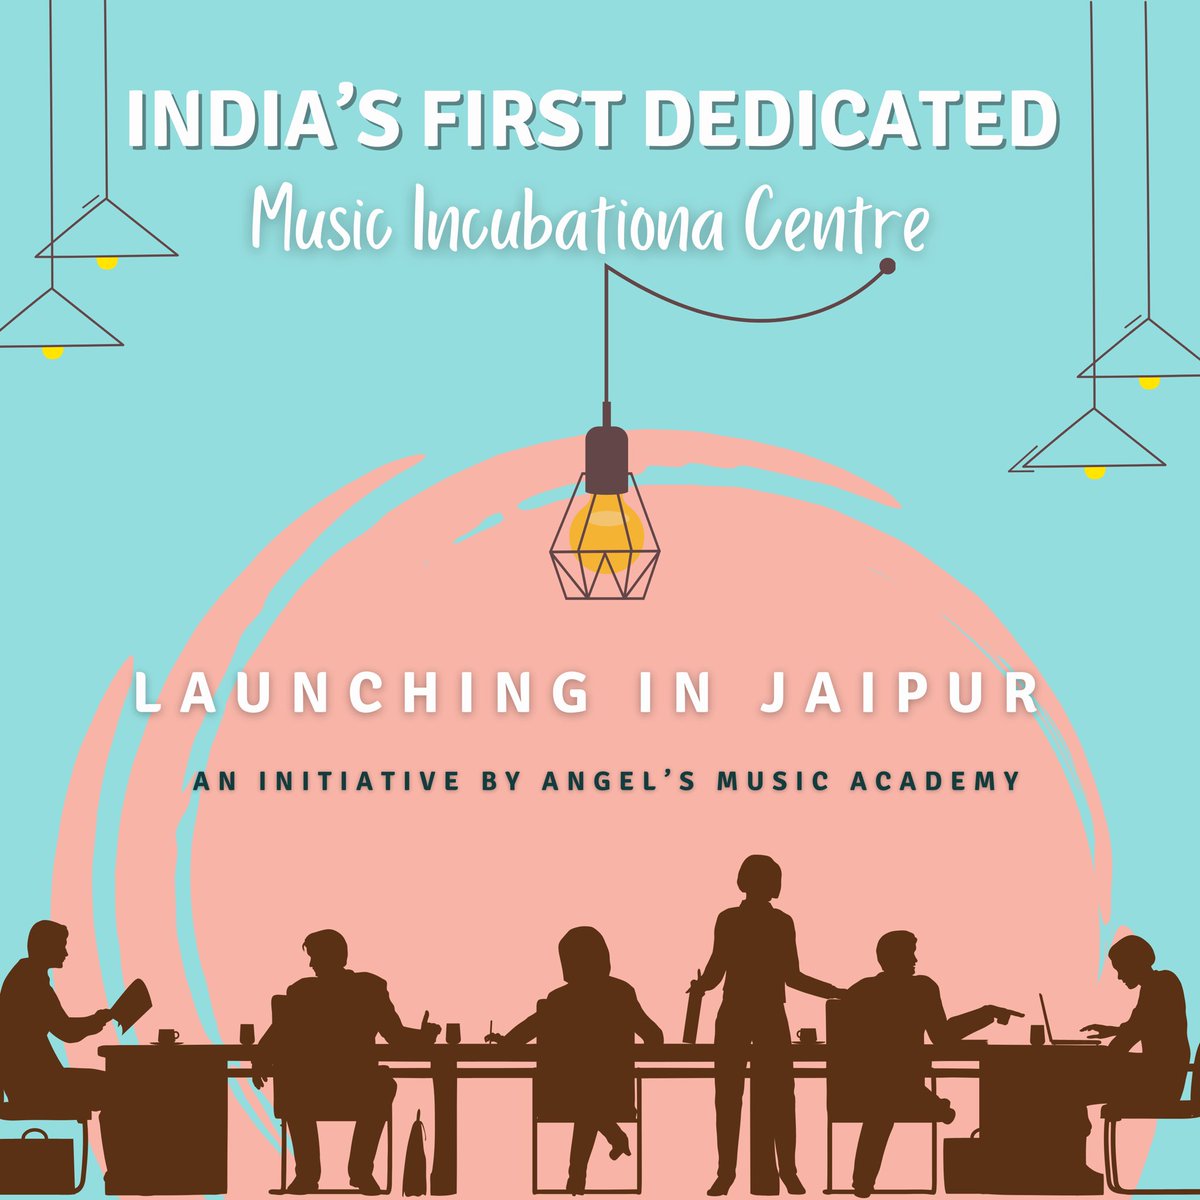 We are opening our doors for the Artists & Music startups by launching India’s first dedicated Music #incubationcenter .📍
An initiative by @angelsmusicacademy 💫🌟
#incubationcenter#jampad #musicincubator #angelsmusicacademy #jaipur #jaipurdiaries #jaipurcity #jaipurbuzz